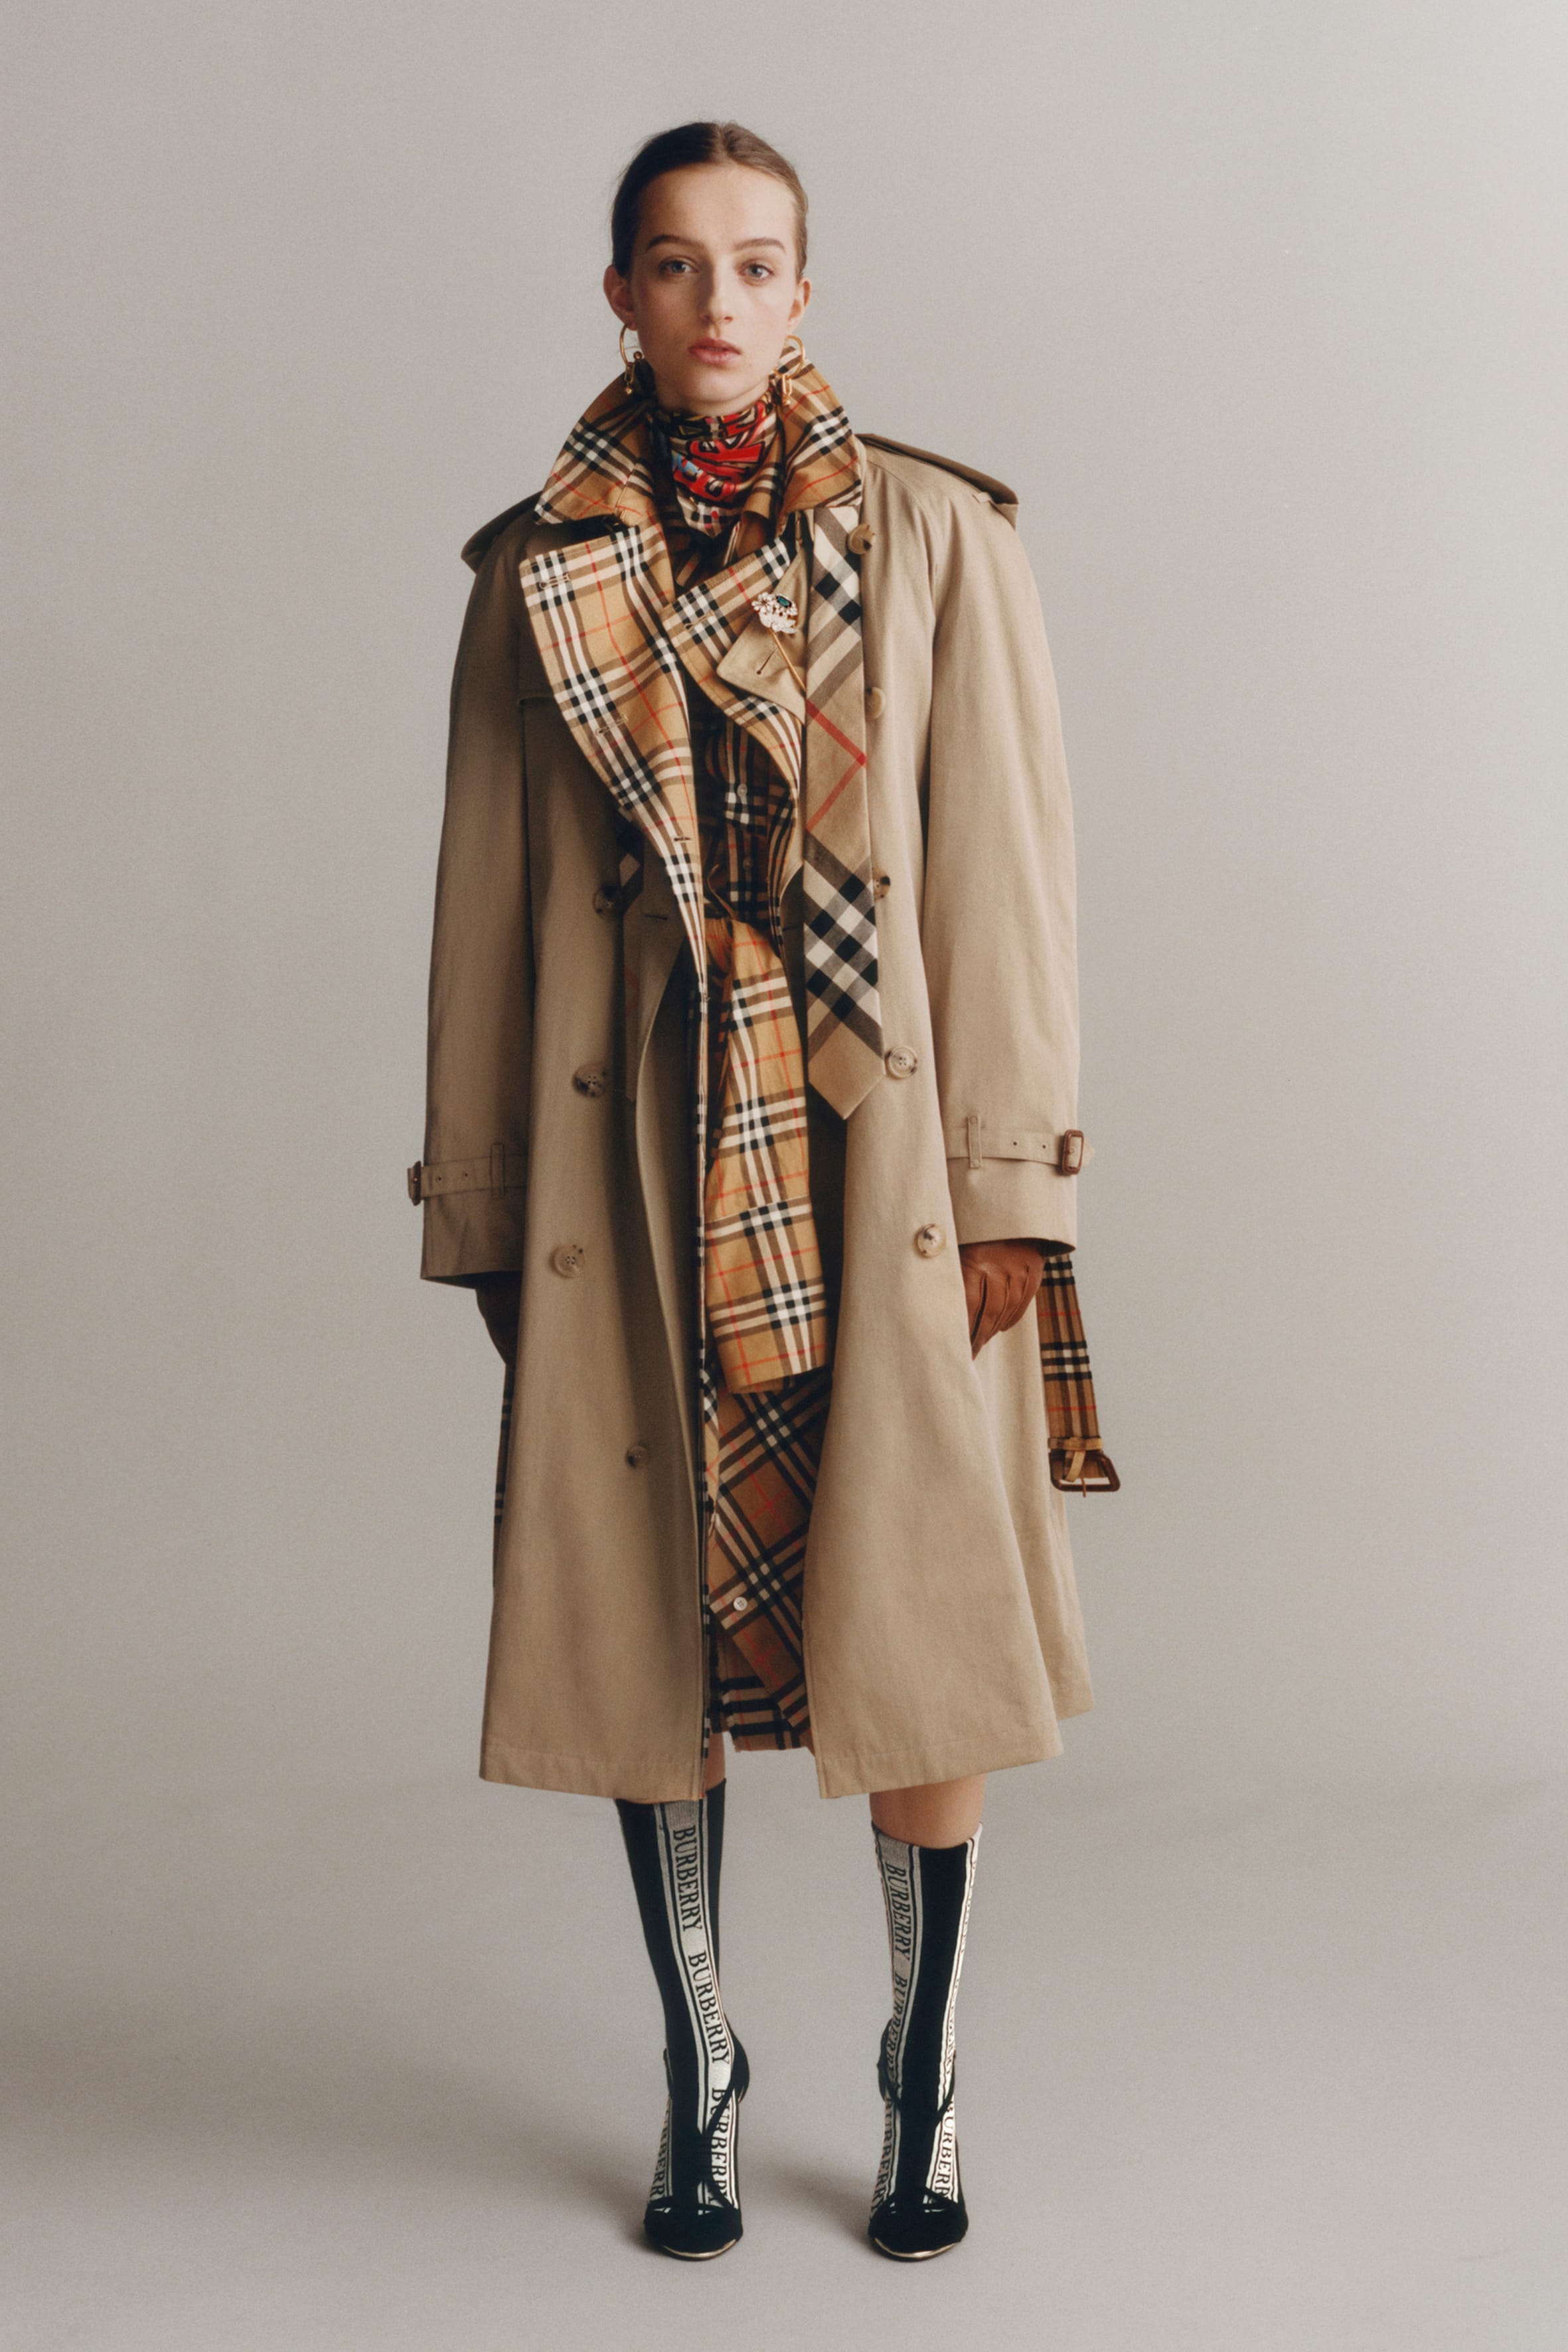 Burberry Iconic Trench Coat Reimagined 